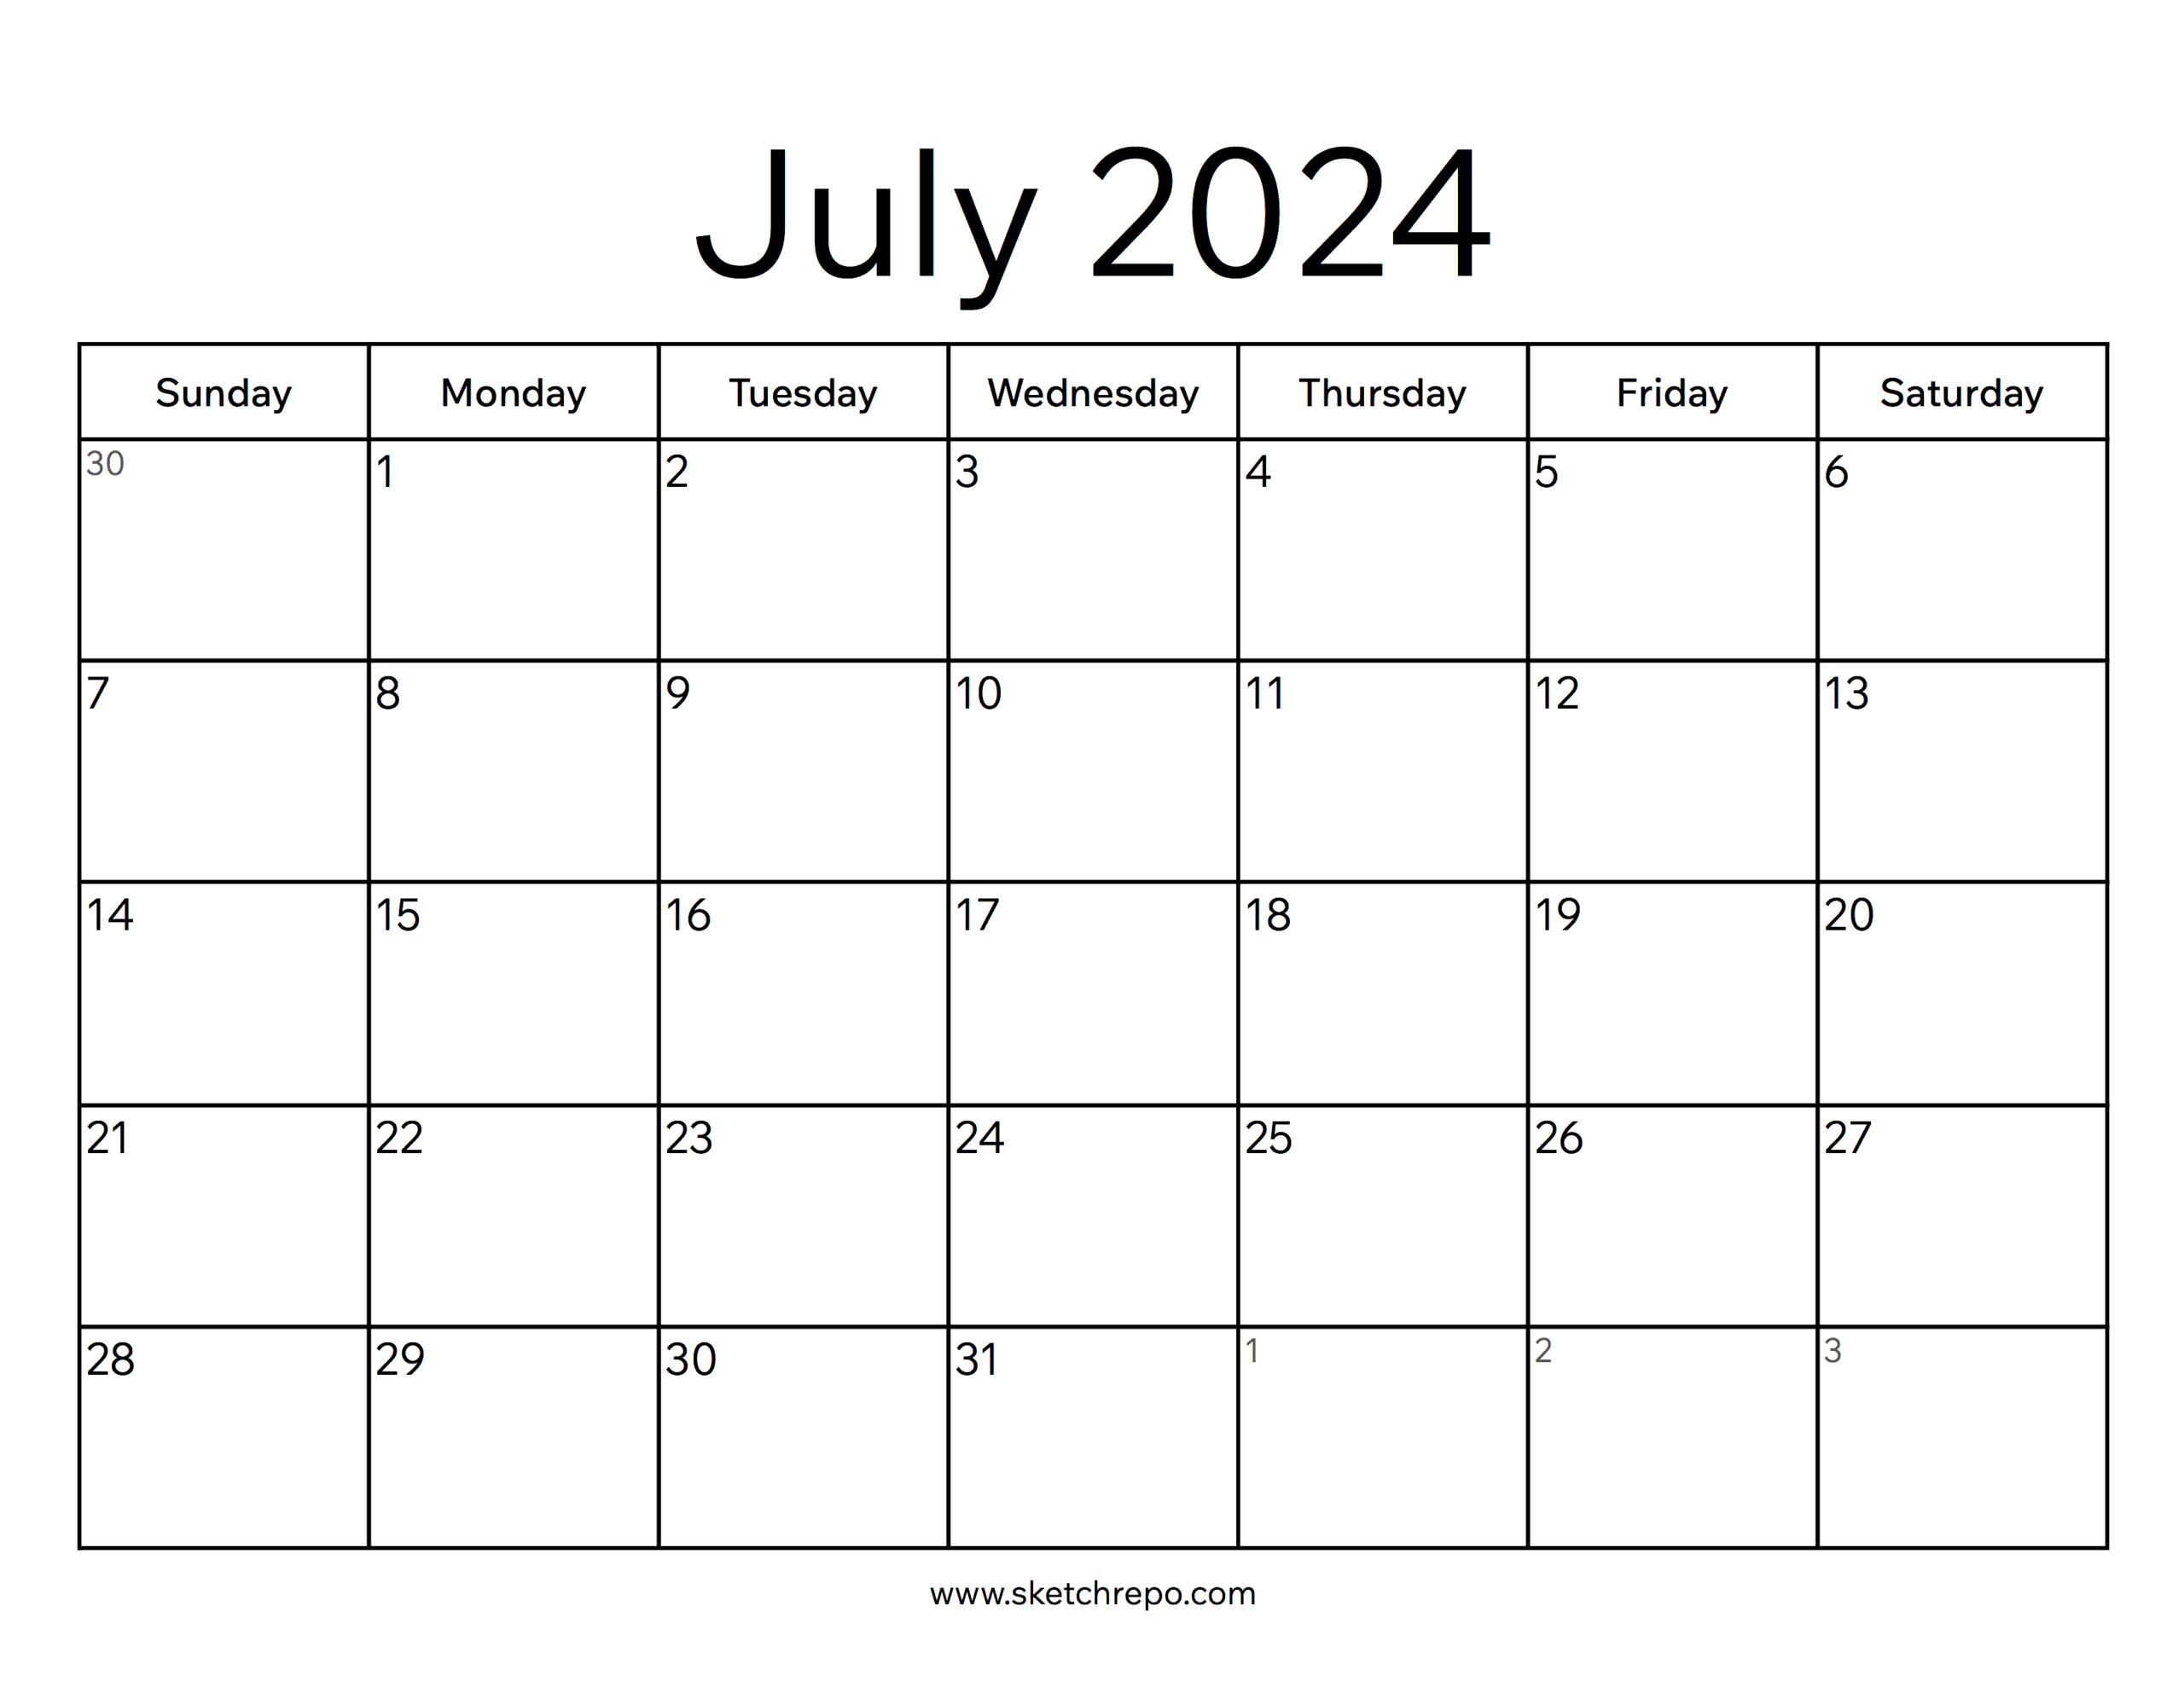 July 2024 Calendar – Sketch Repo intended for 2024 Calendar For July